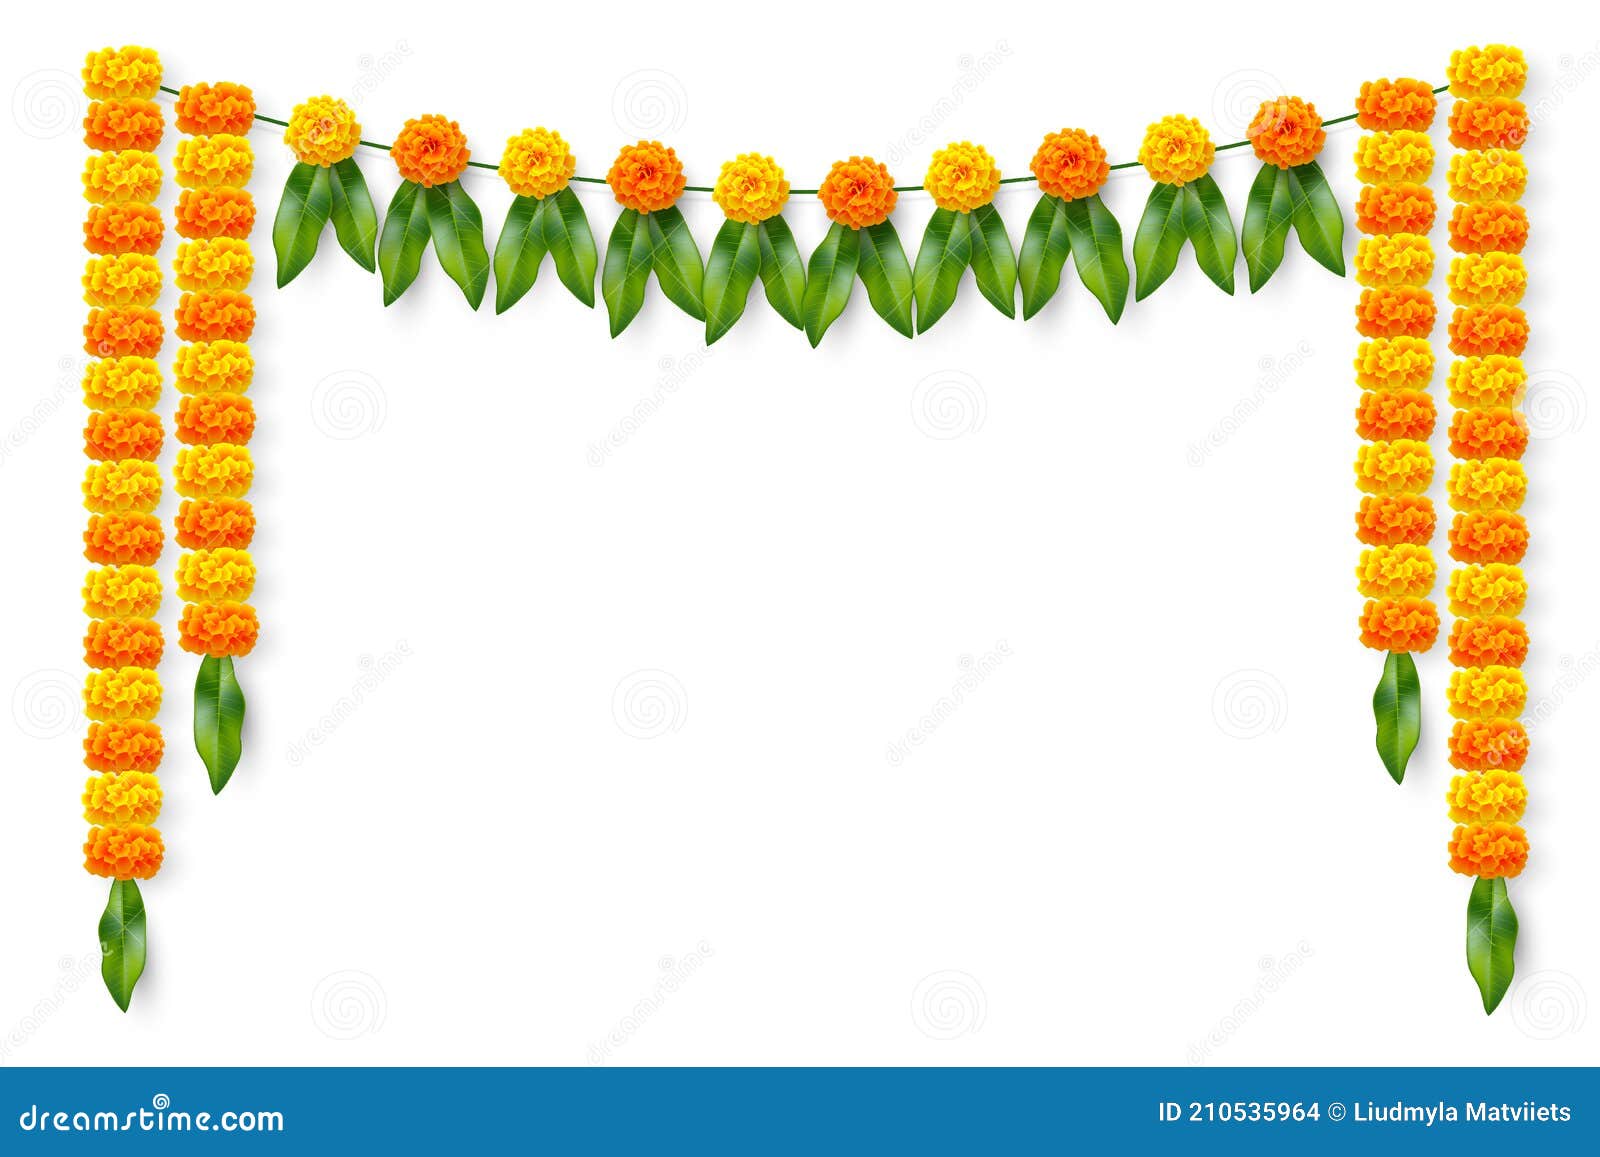 Traditional Indian Floral Garland. Stock Photo - Image of culture ...